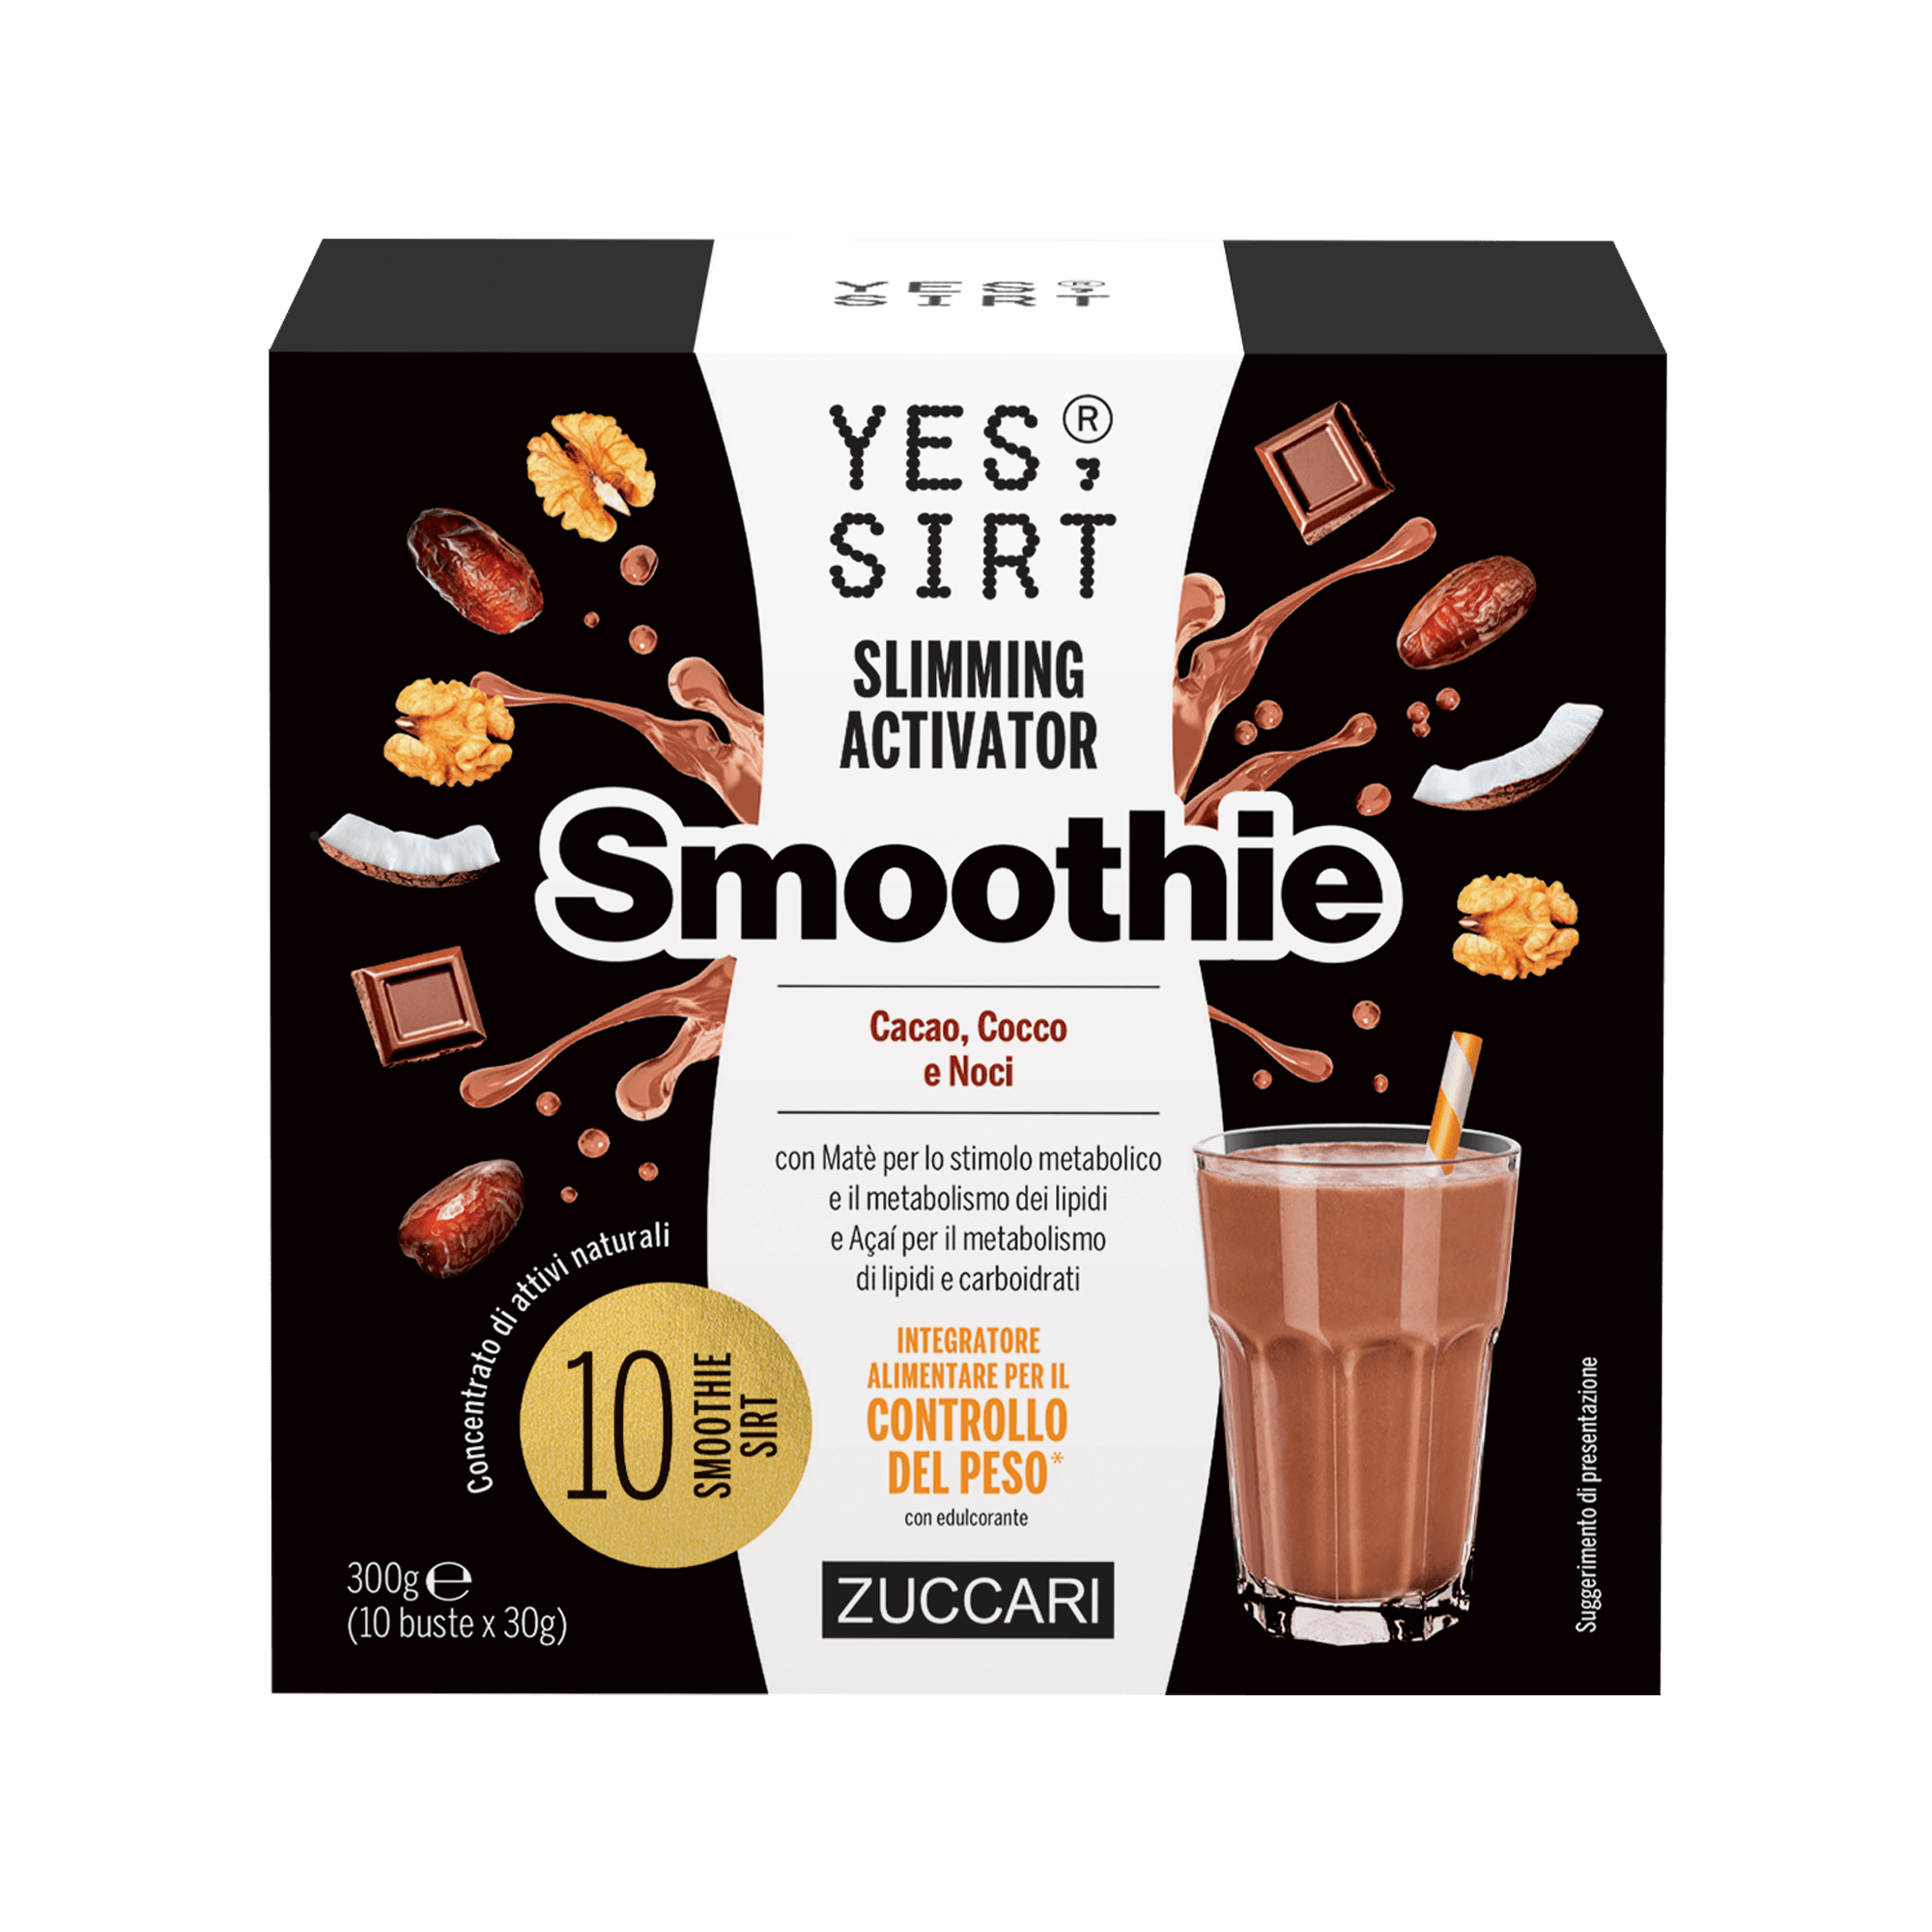 Yes Sirt Slimming Activator Smoothie Cacao, Cocco e Noci